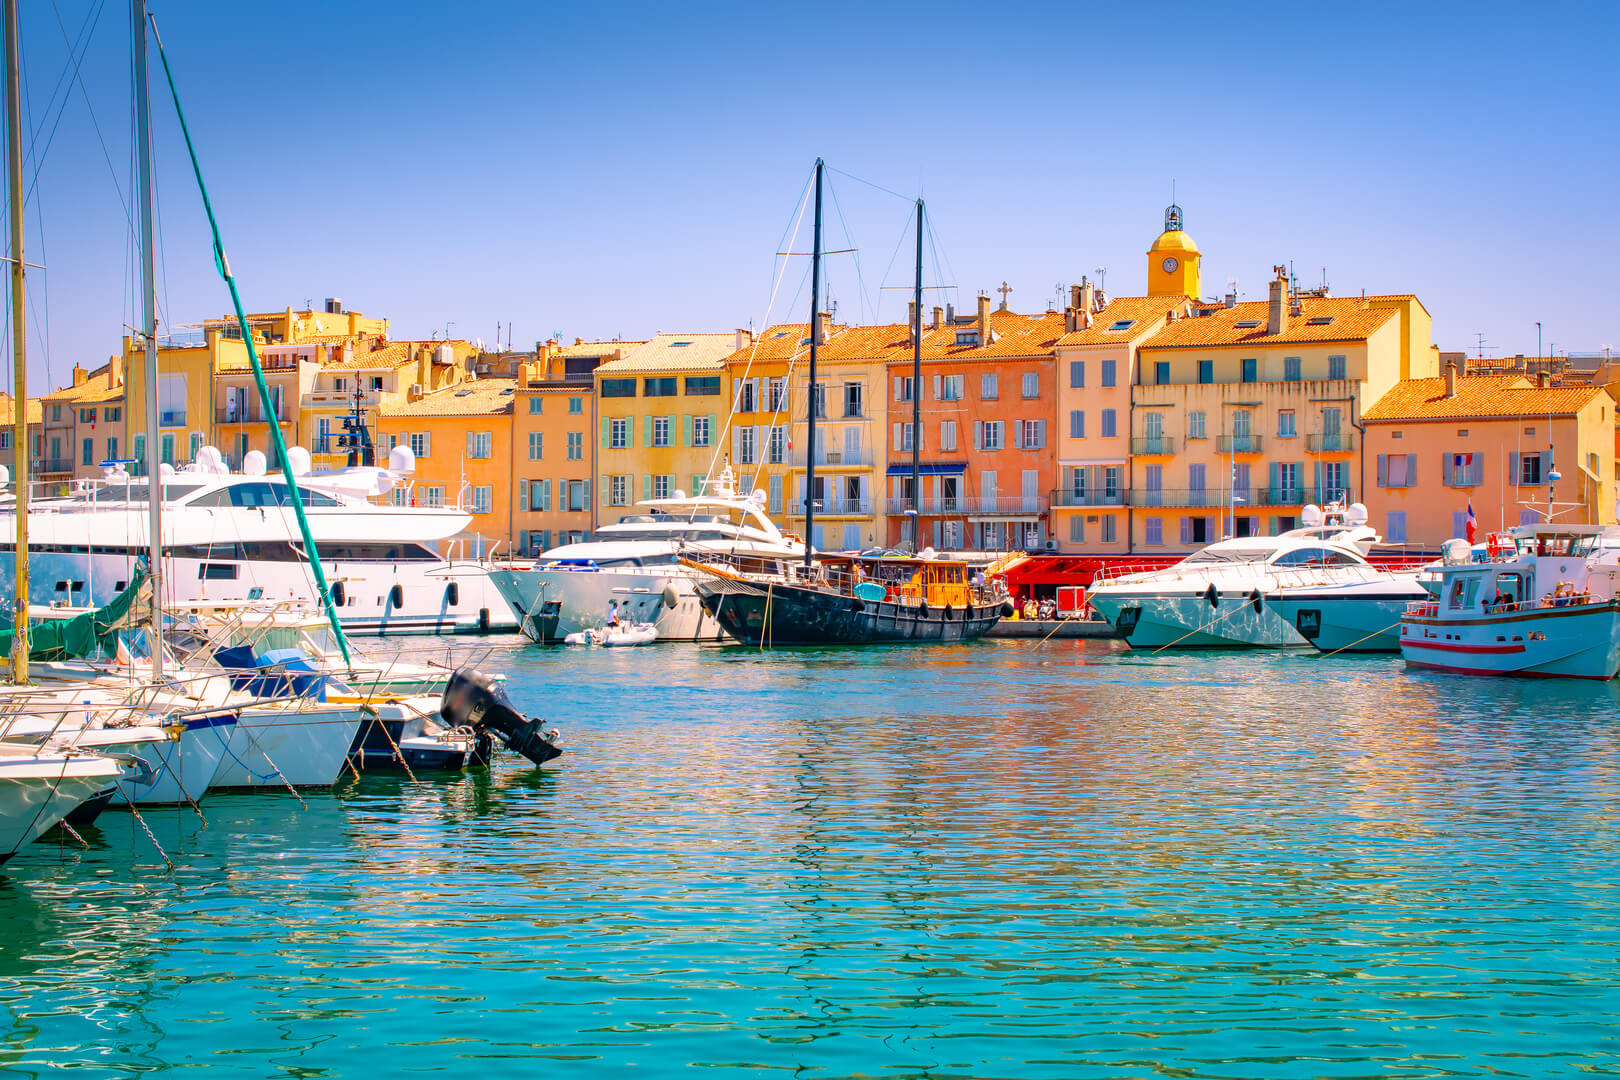 Saint Tropez, South of France. Luxury yachts in marina.